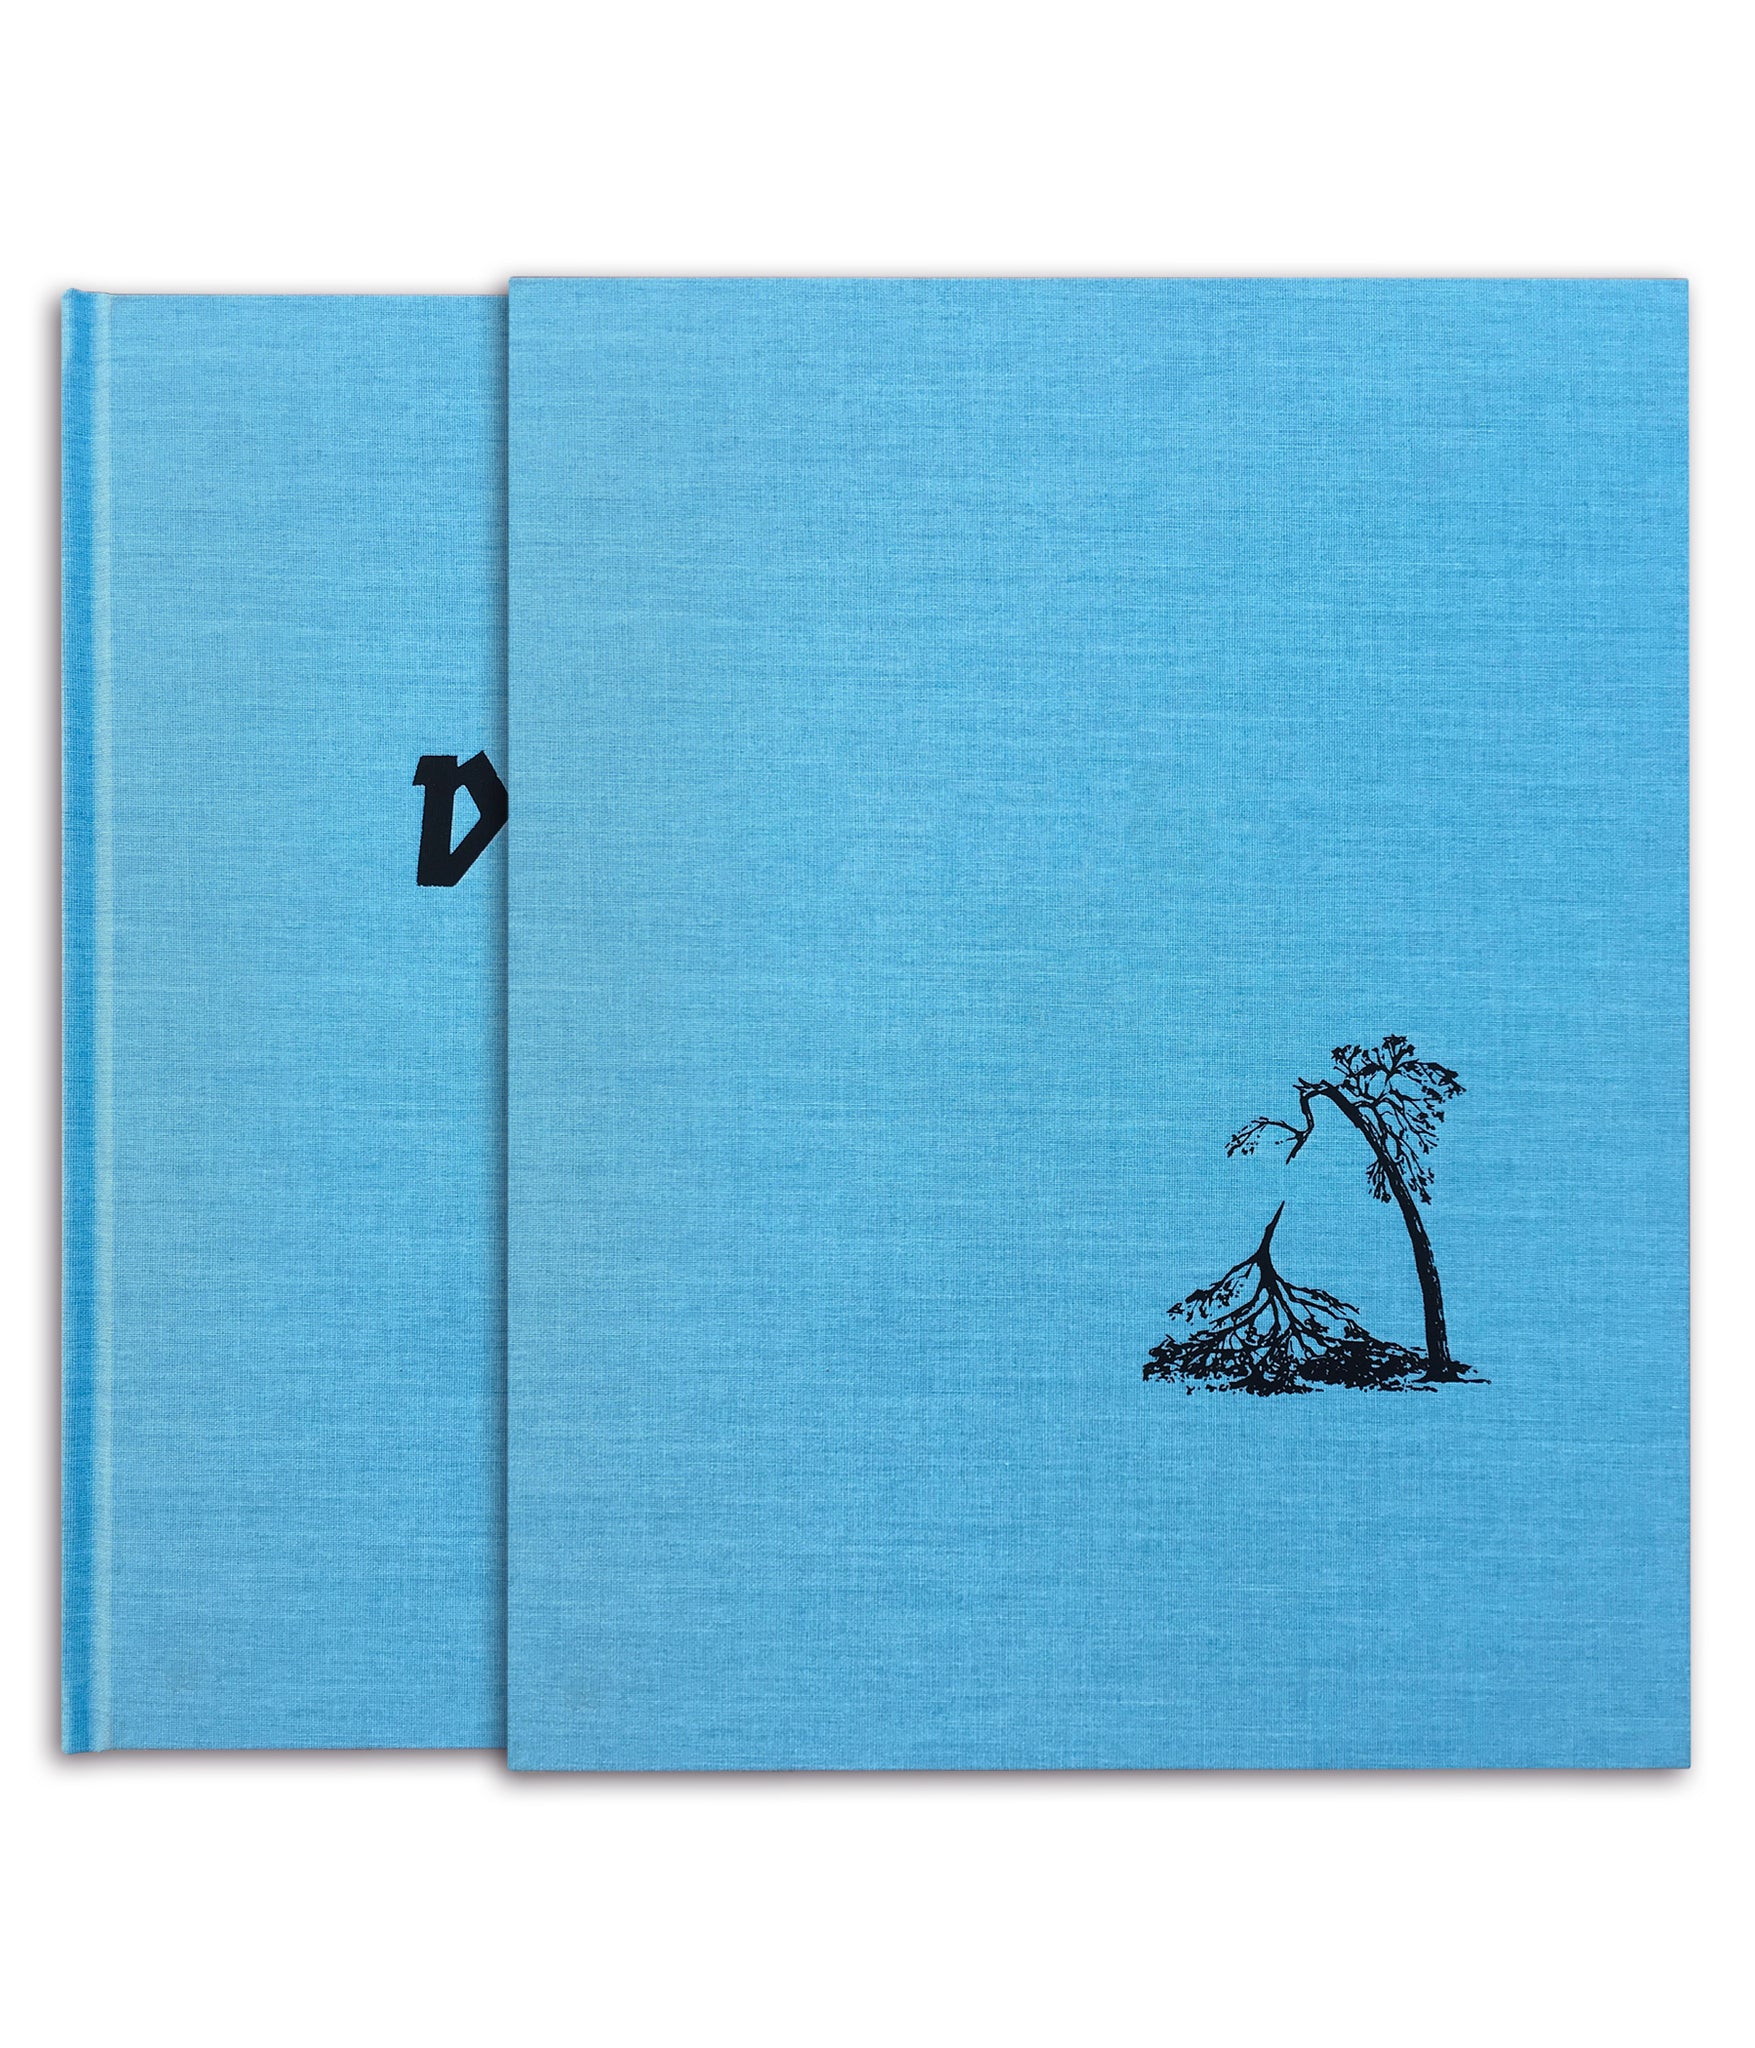 Driftless — Special Edition Slipcase with Print